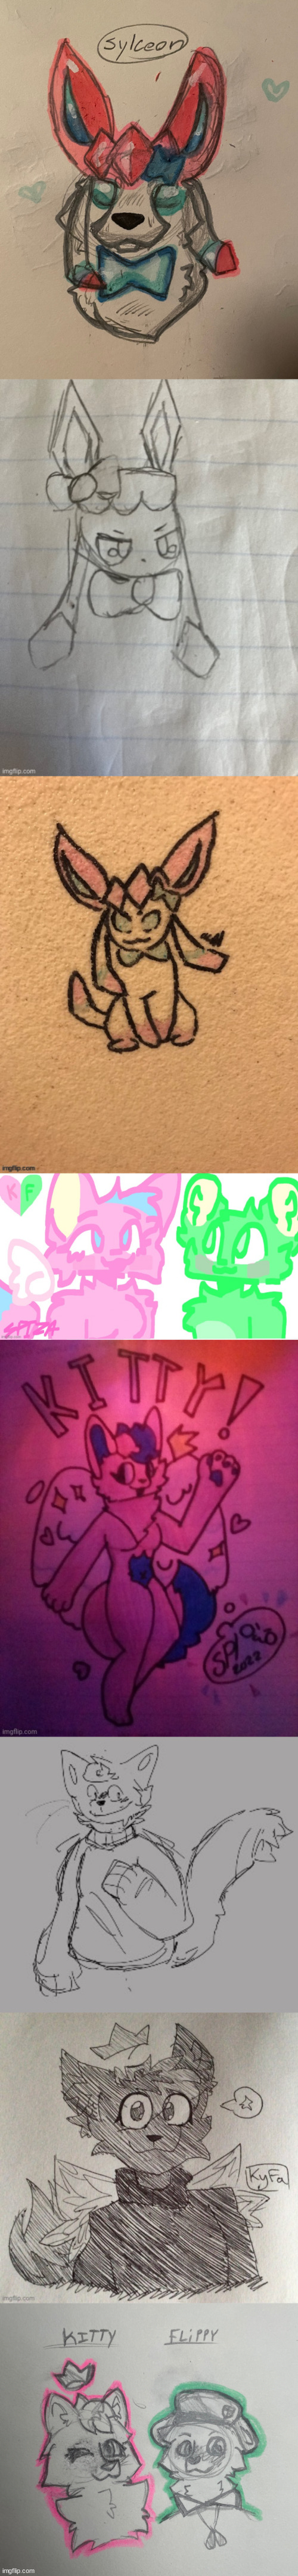 arts | image tagged in sylceon drawn by yoine,sylceon drawn by acid,flippy x kitty drawn by spi,og kitty drawn by spi,kitty drawn by fools | made w/ Imgflip meme maker